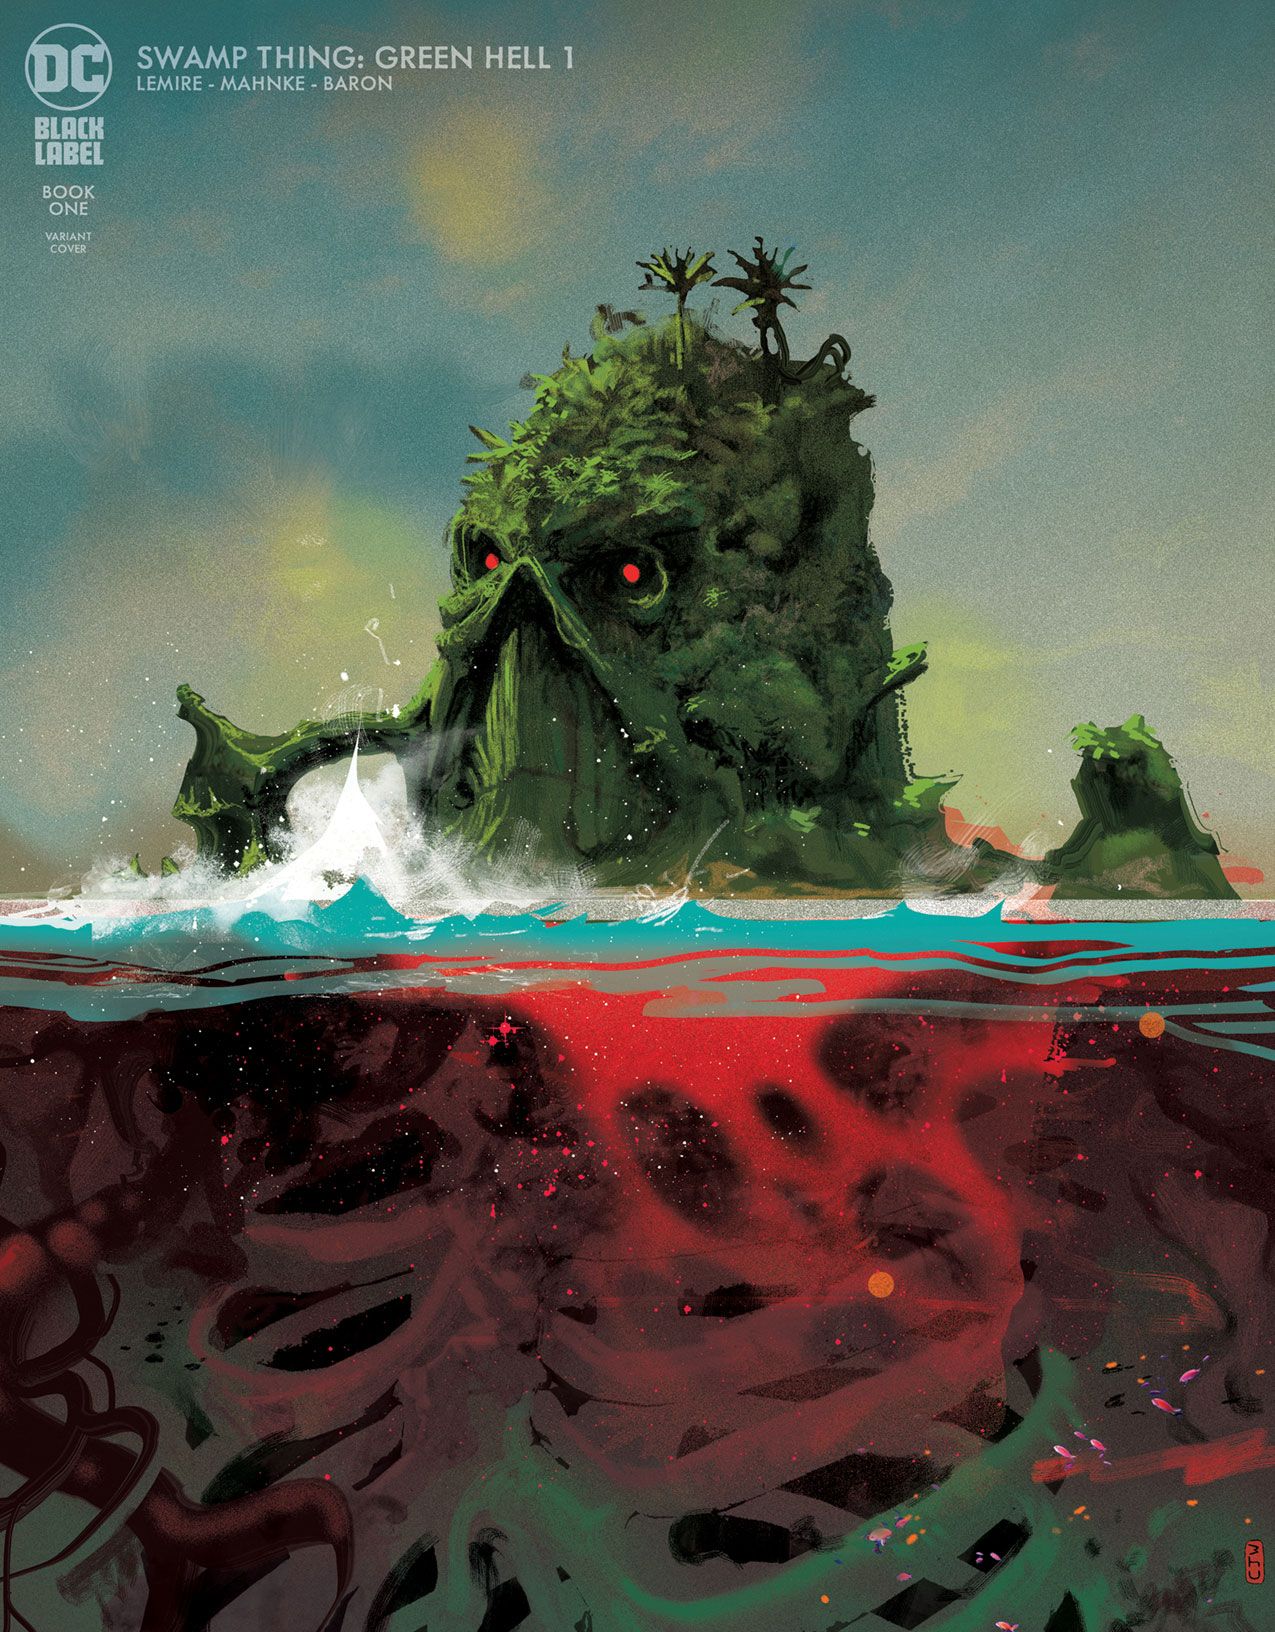 Cover to the DC Comics Black Label series Swamp Thing Green Hell 1 by Christian Ward